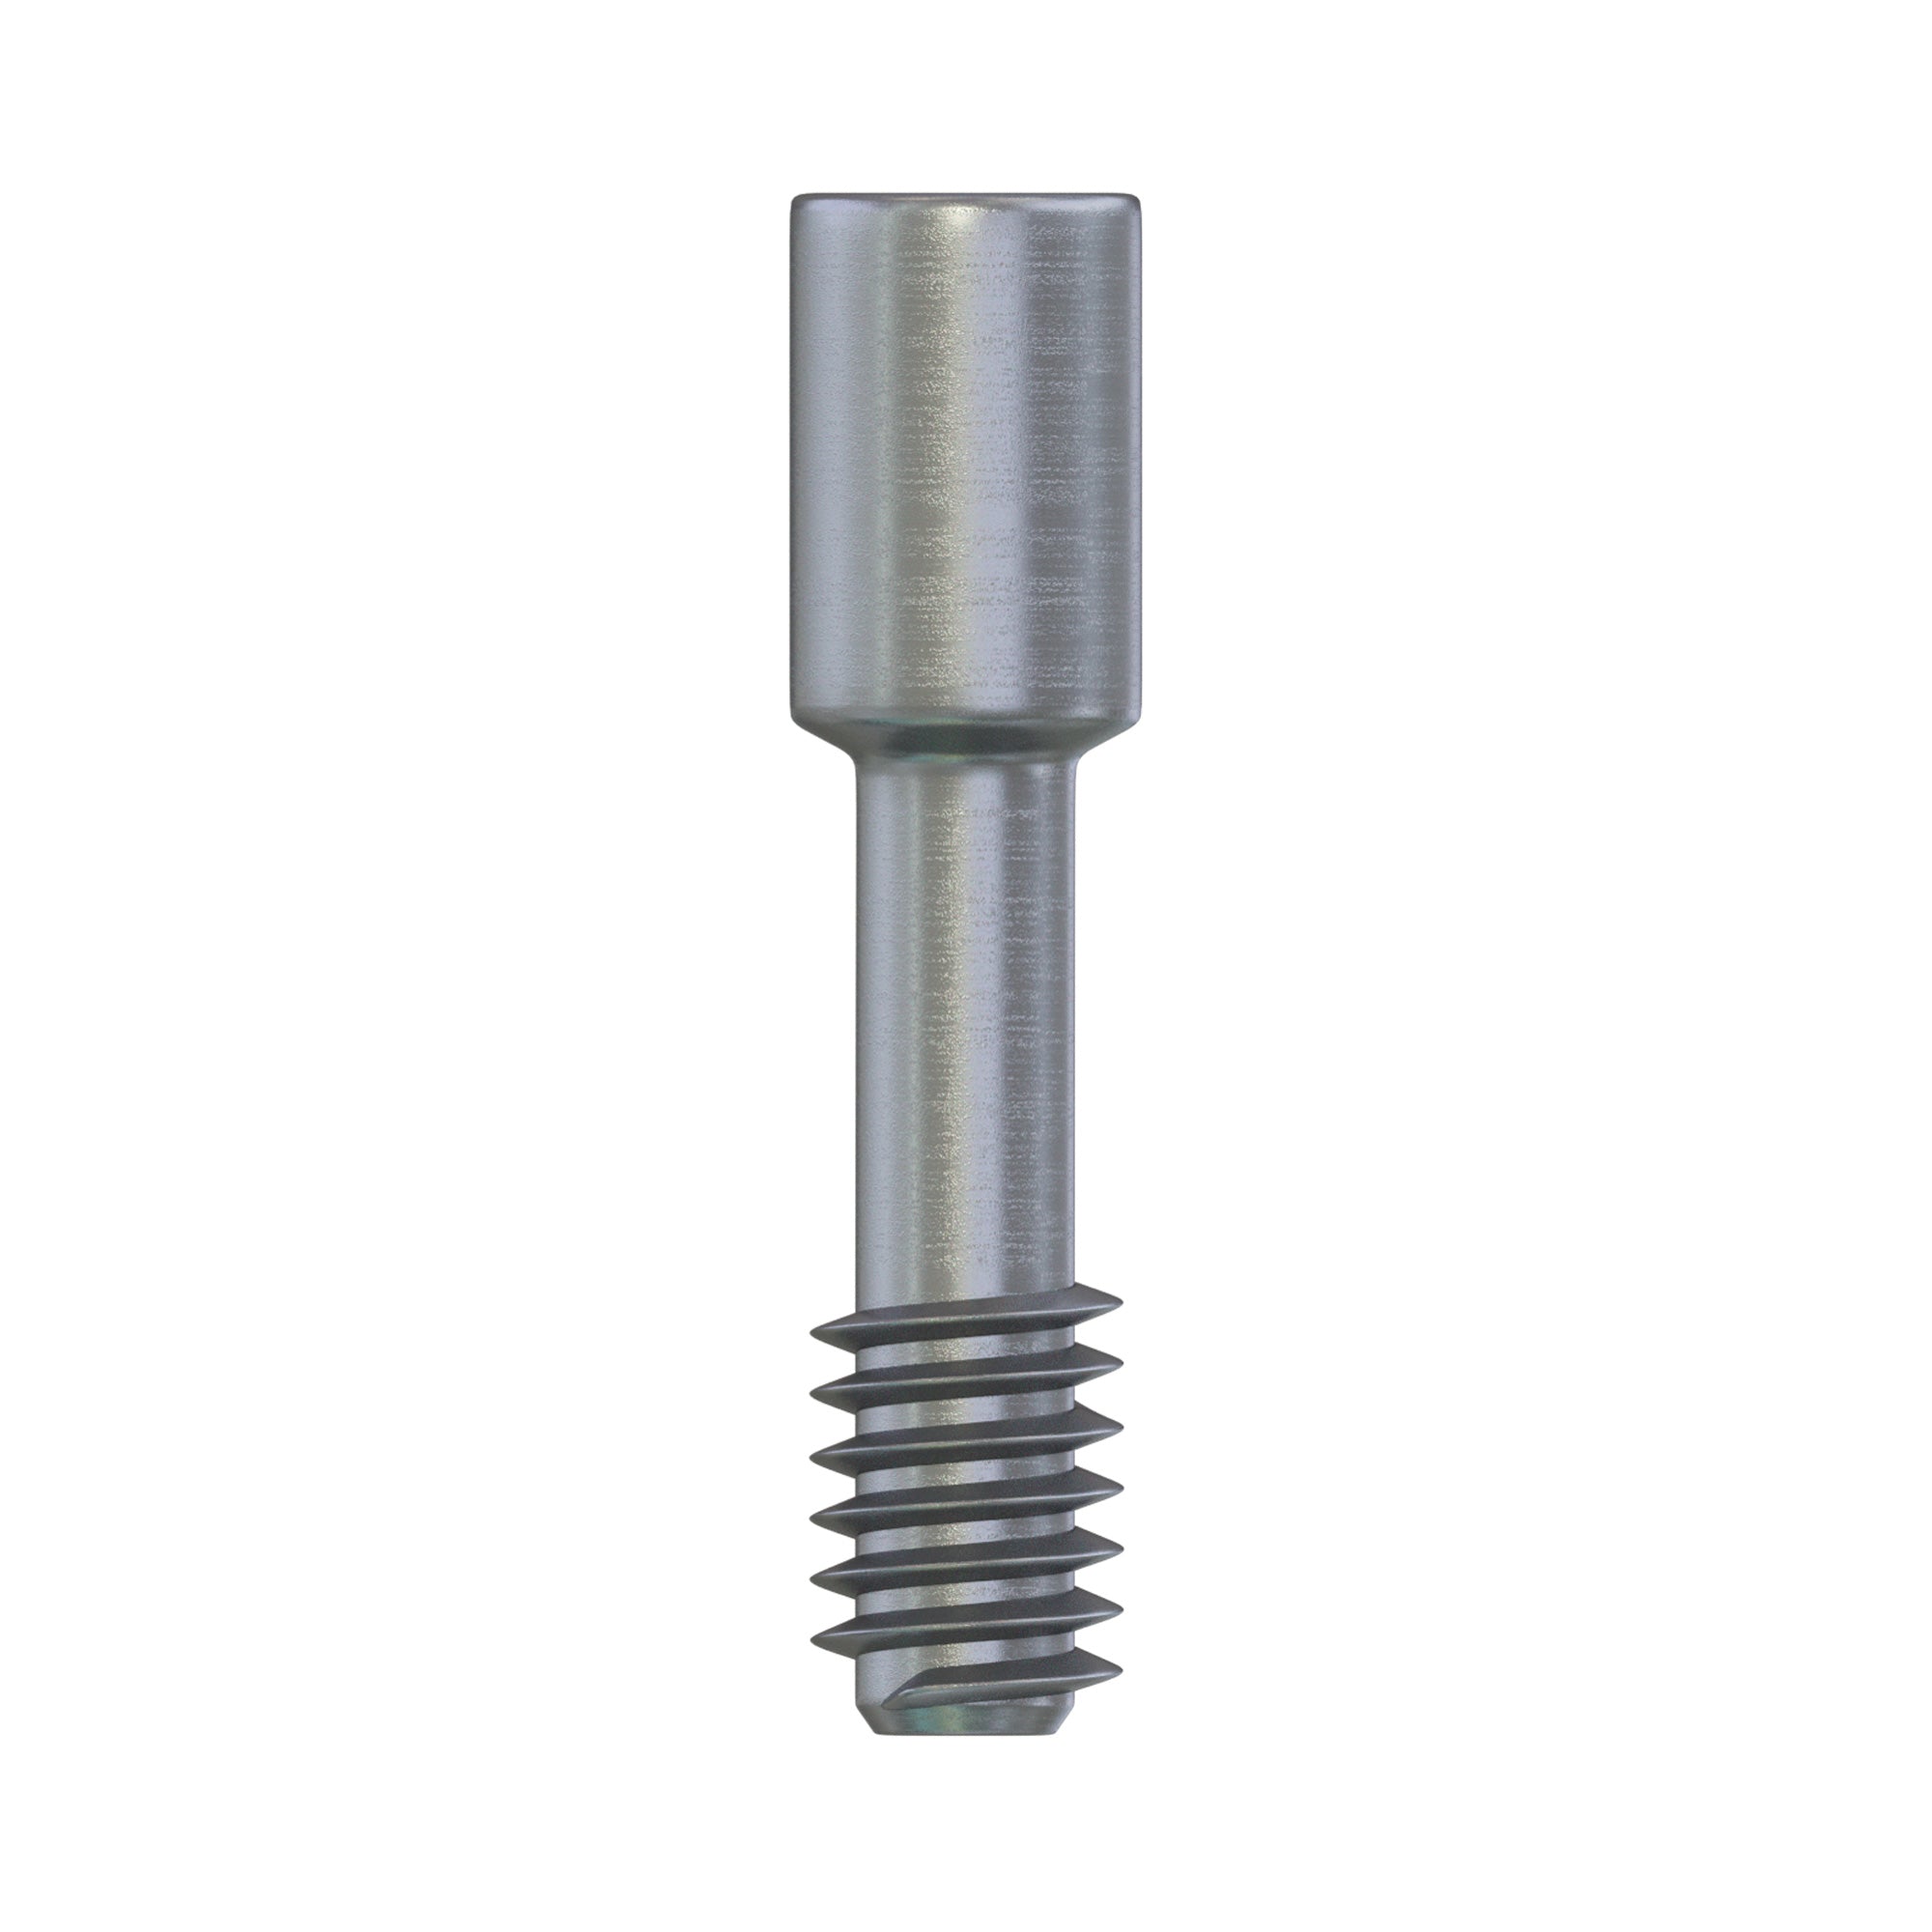 DSI Abutment Fixation Screw - Conical Connection Implant RP Ø4.3-5.0mm